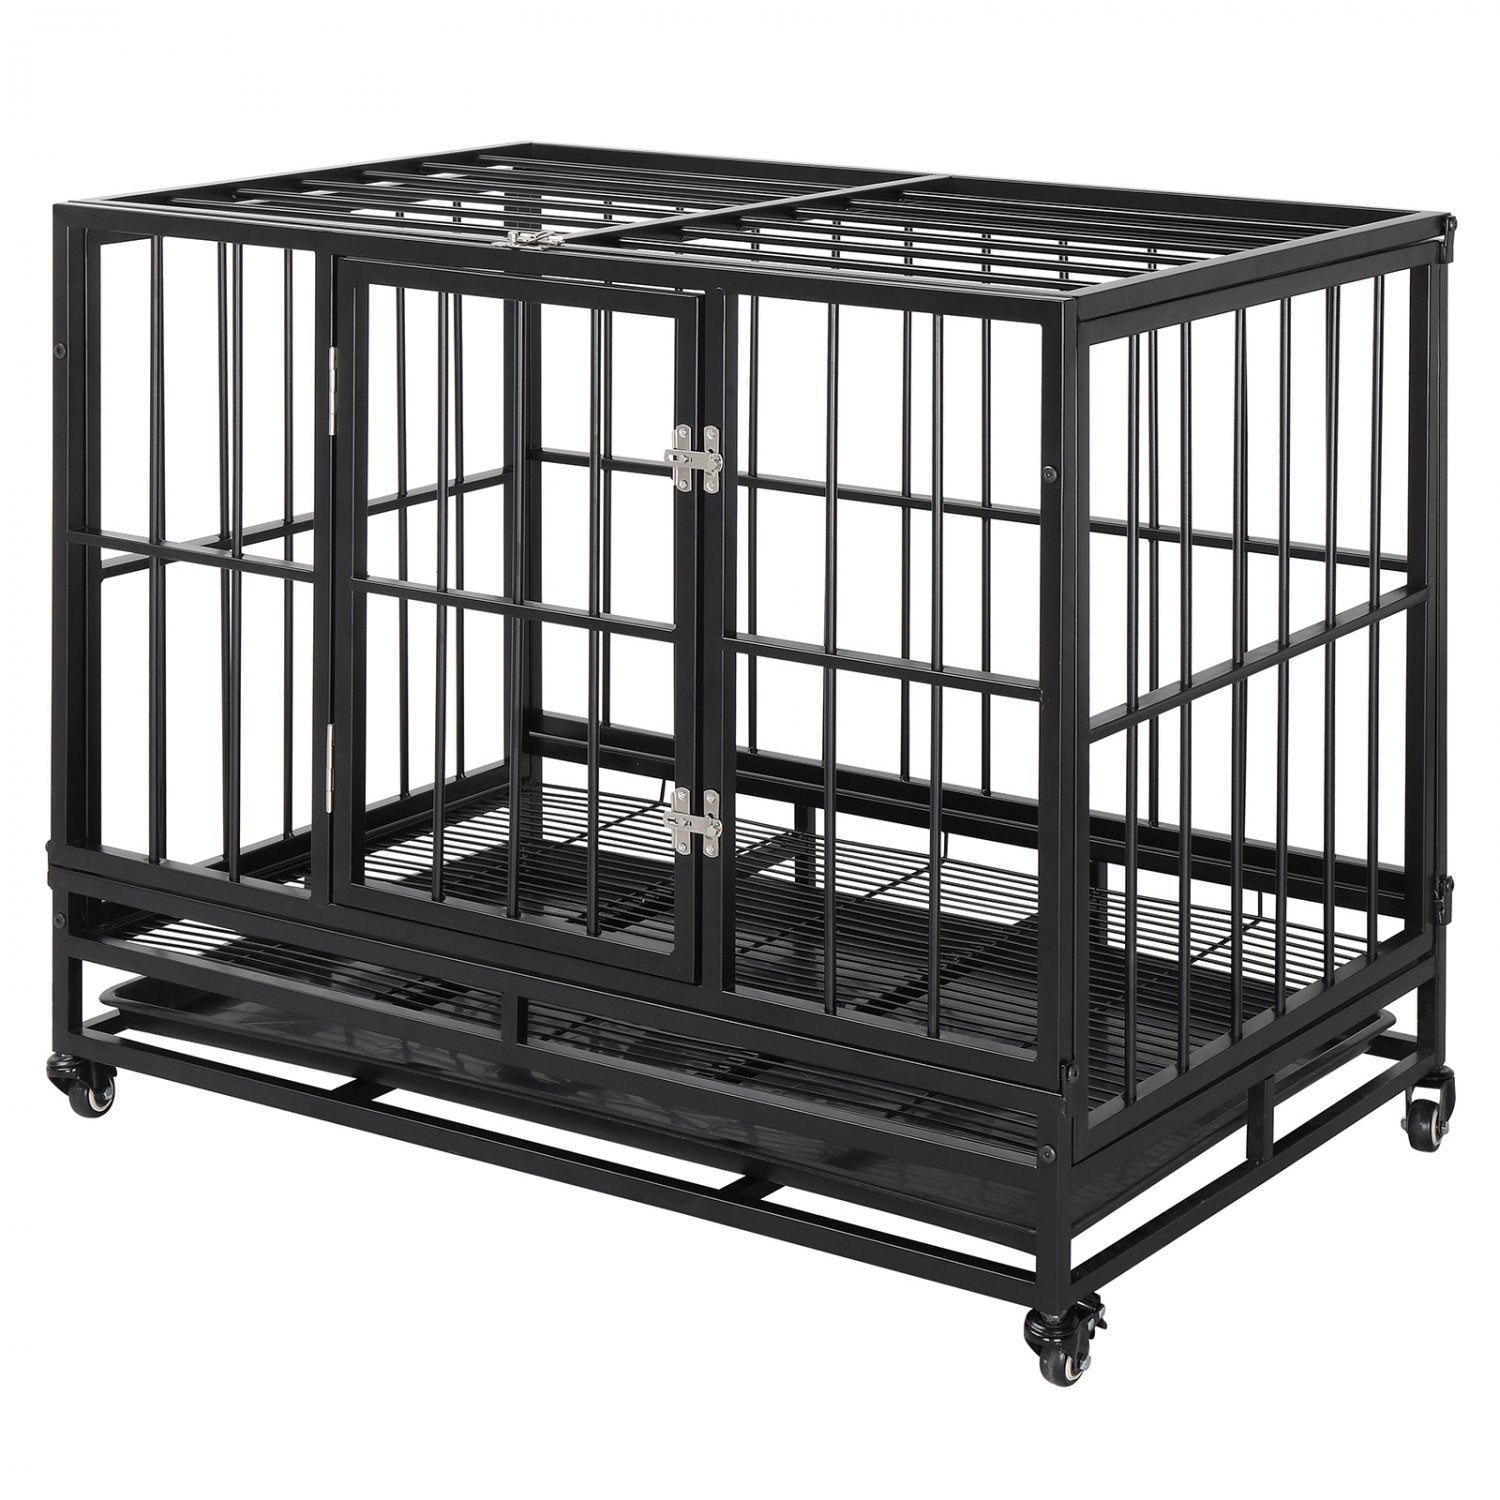 36.5â�� Heavy Duty Dog Cage Crate Kennel Metal Pet Playpen with Tray Black